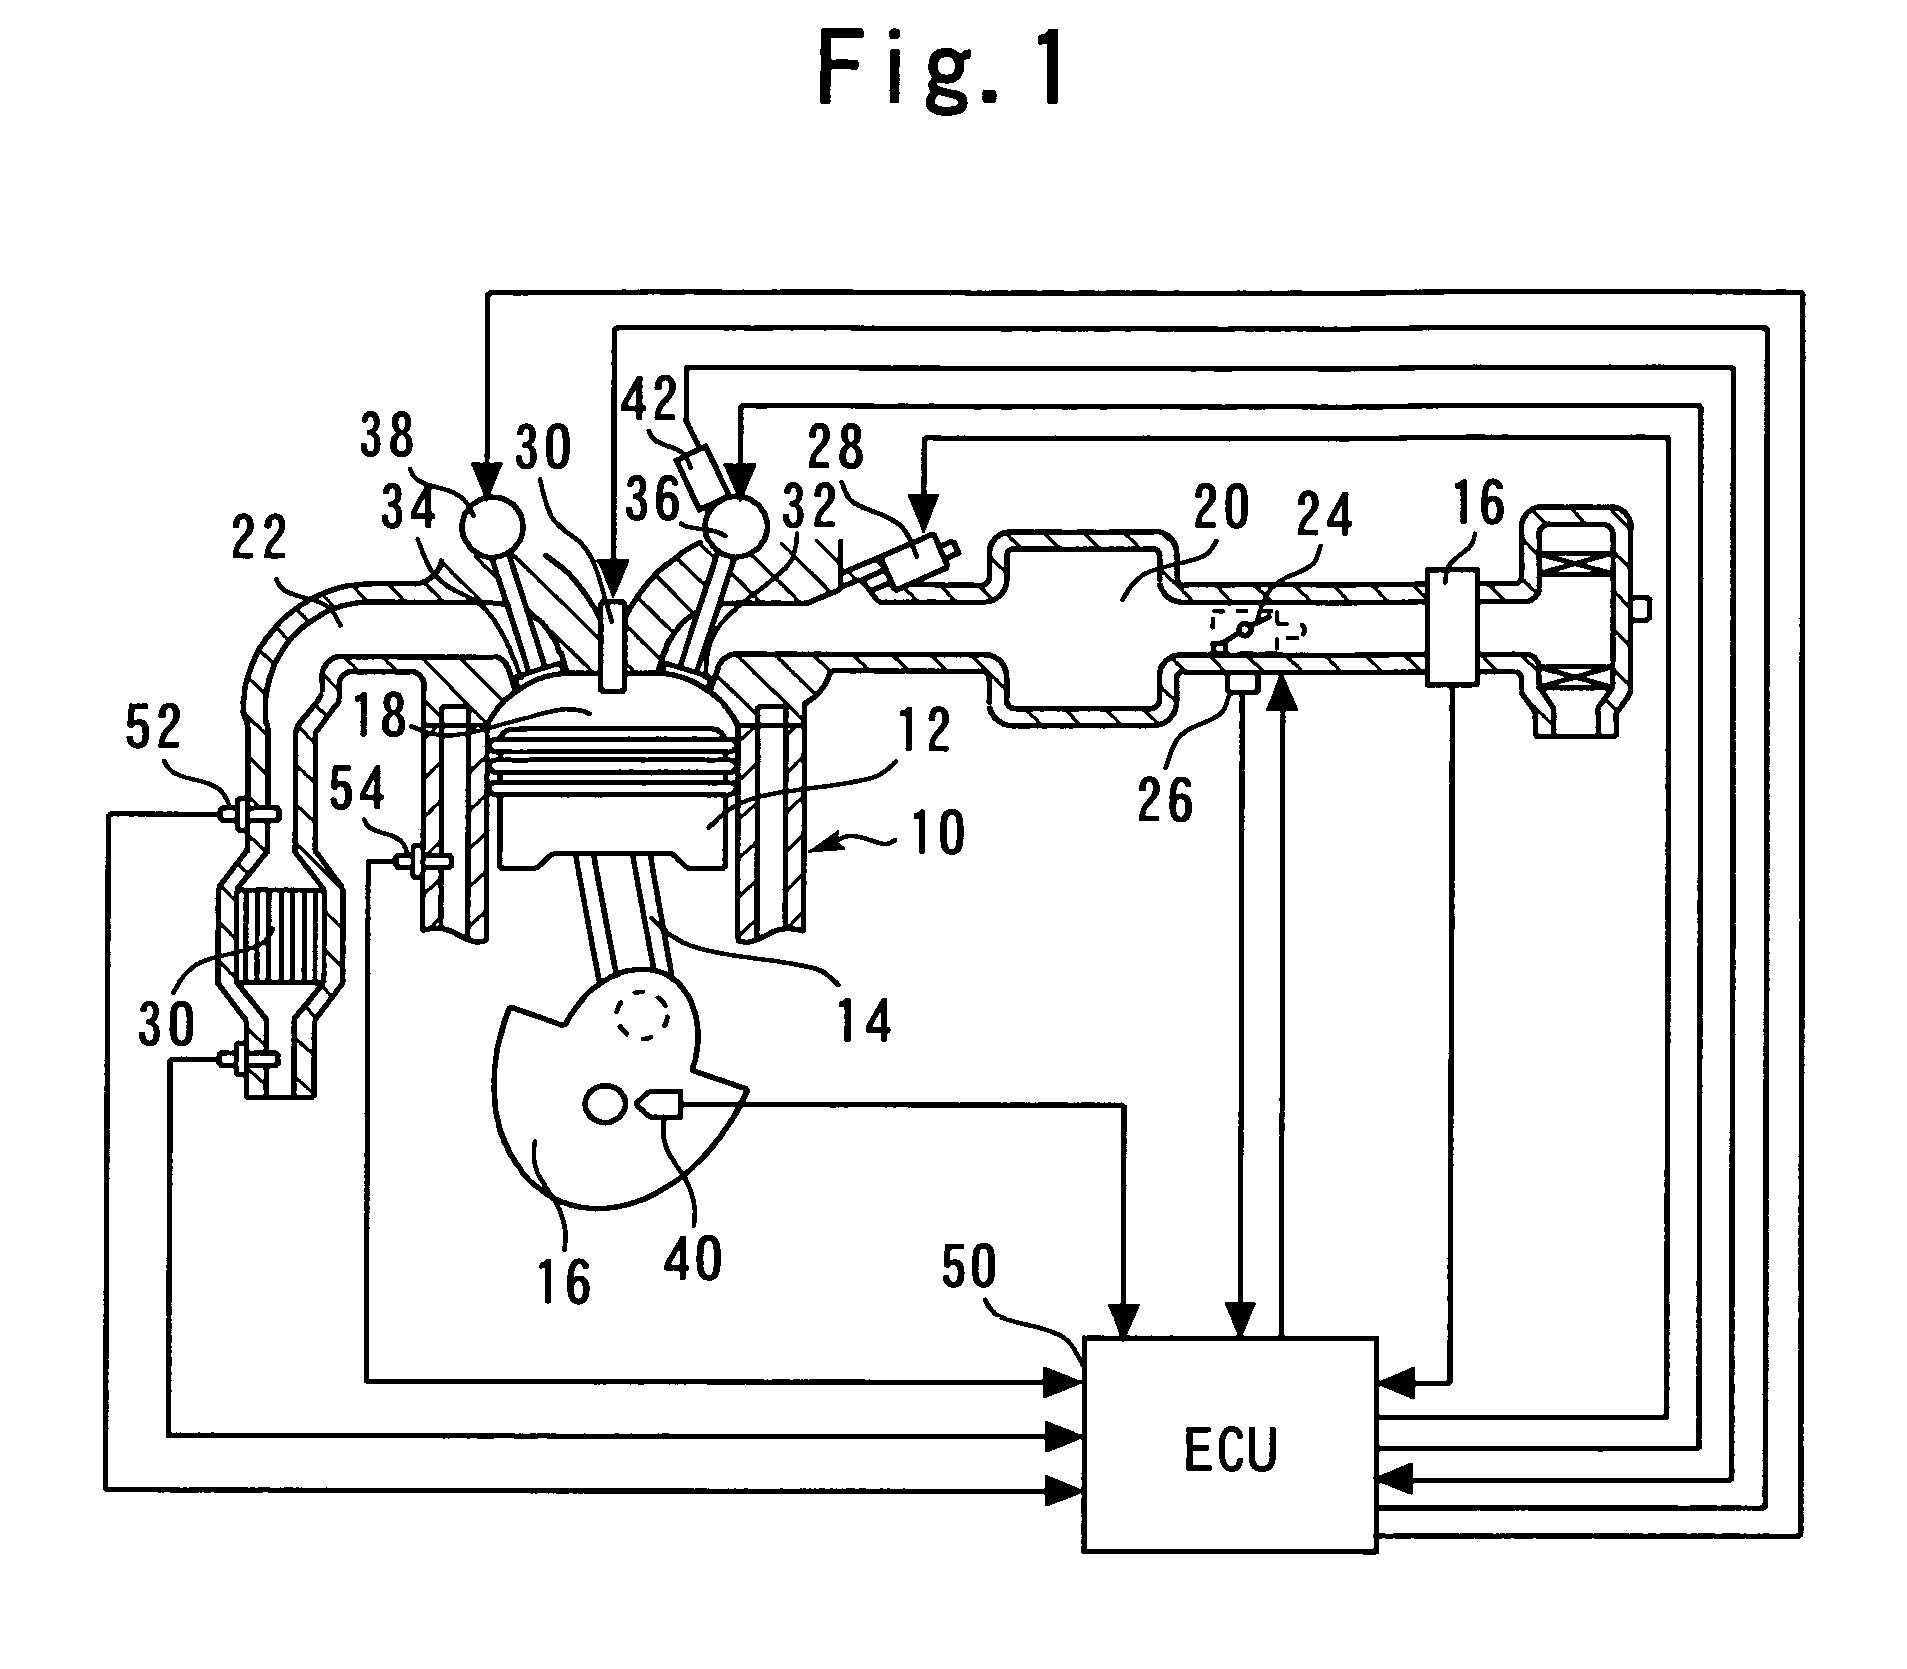 Stop position control apparatus for internal combustion engine